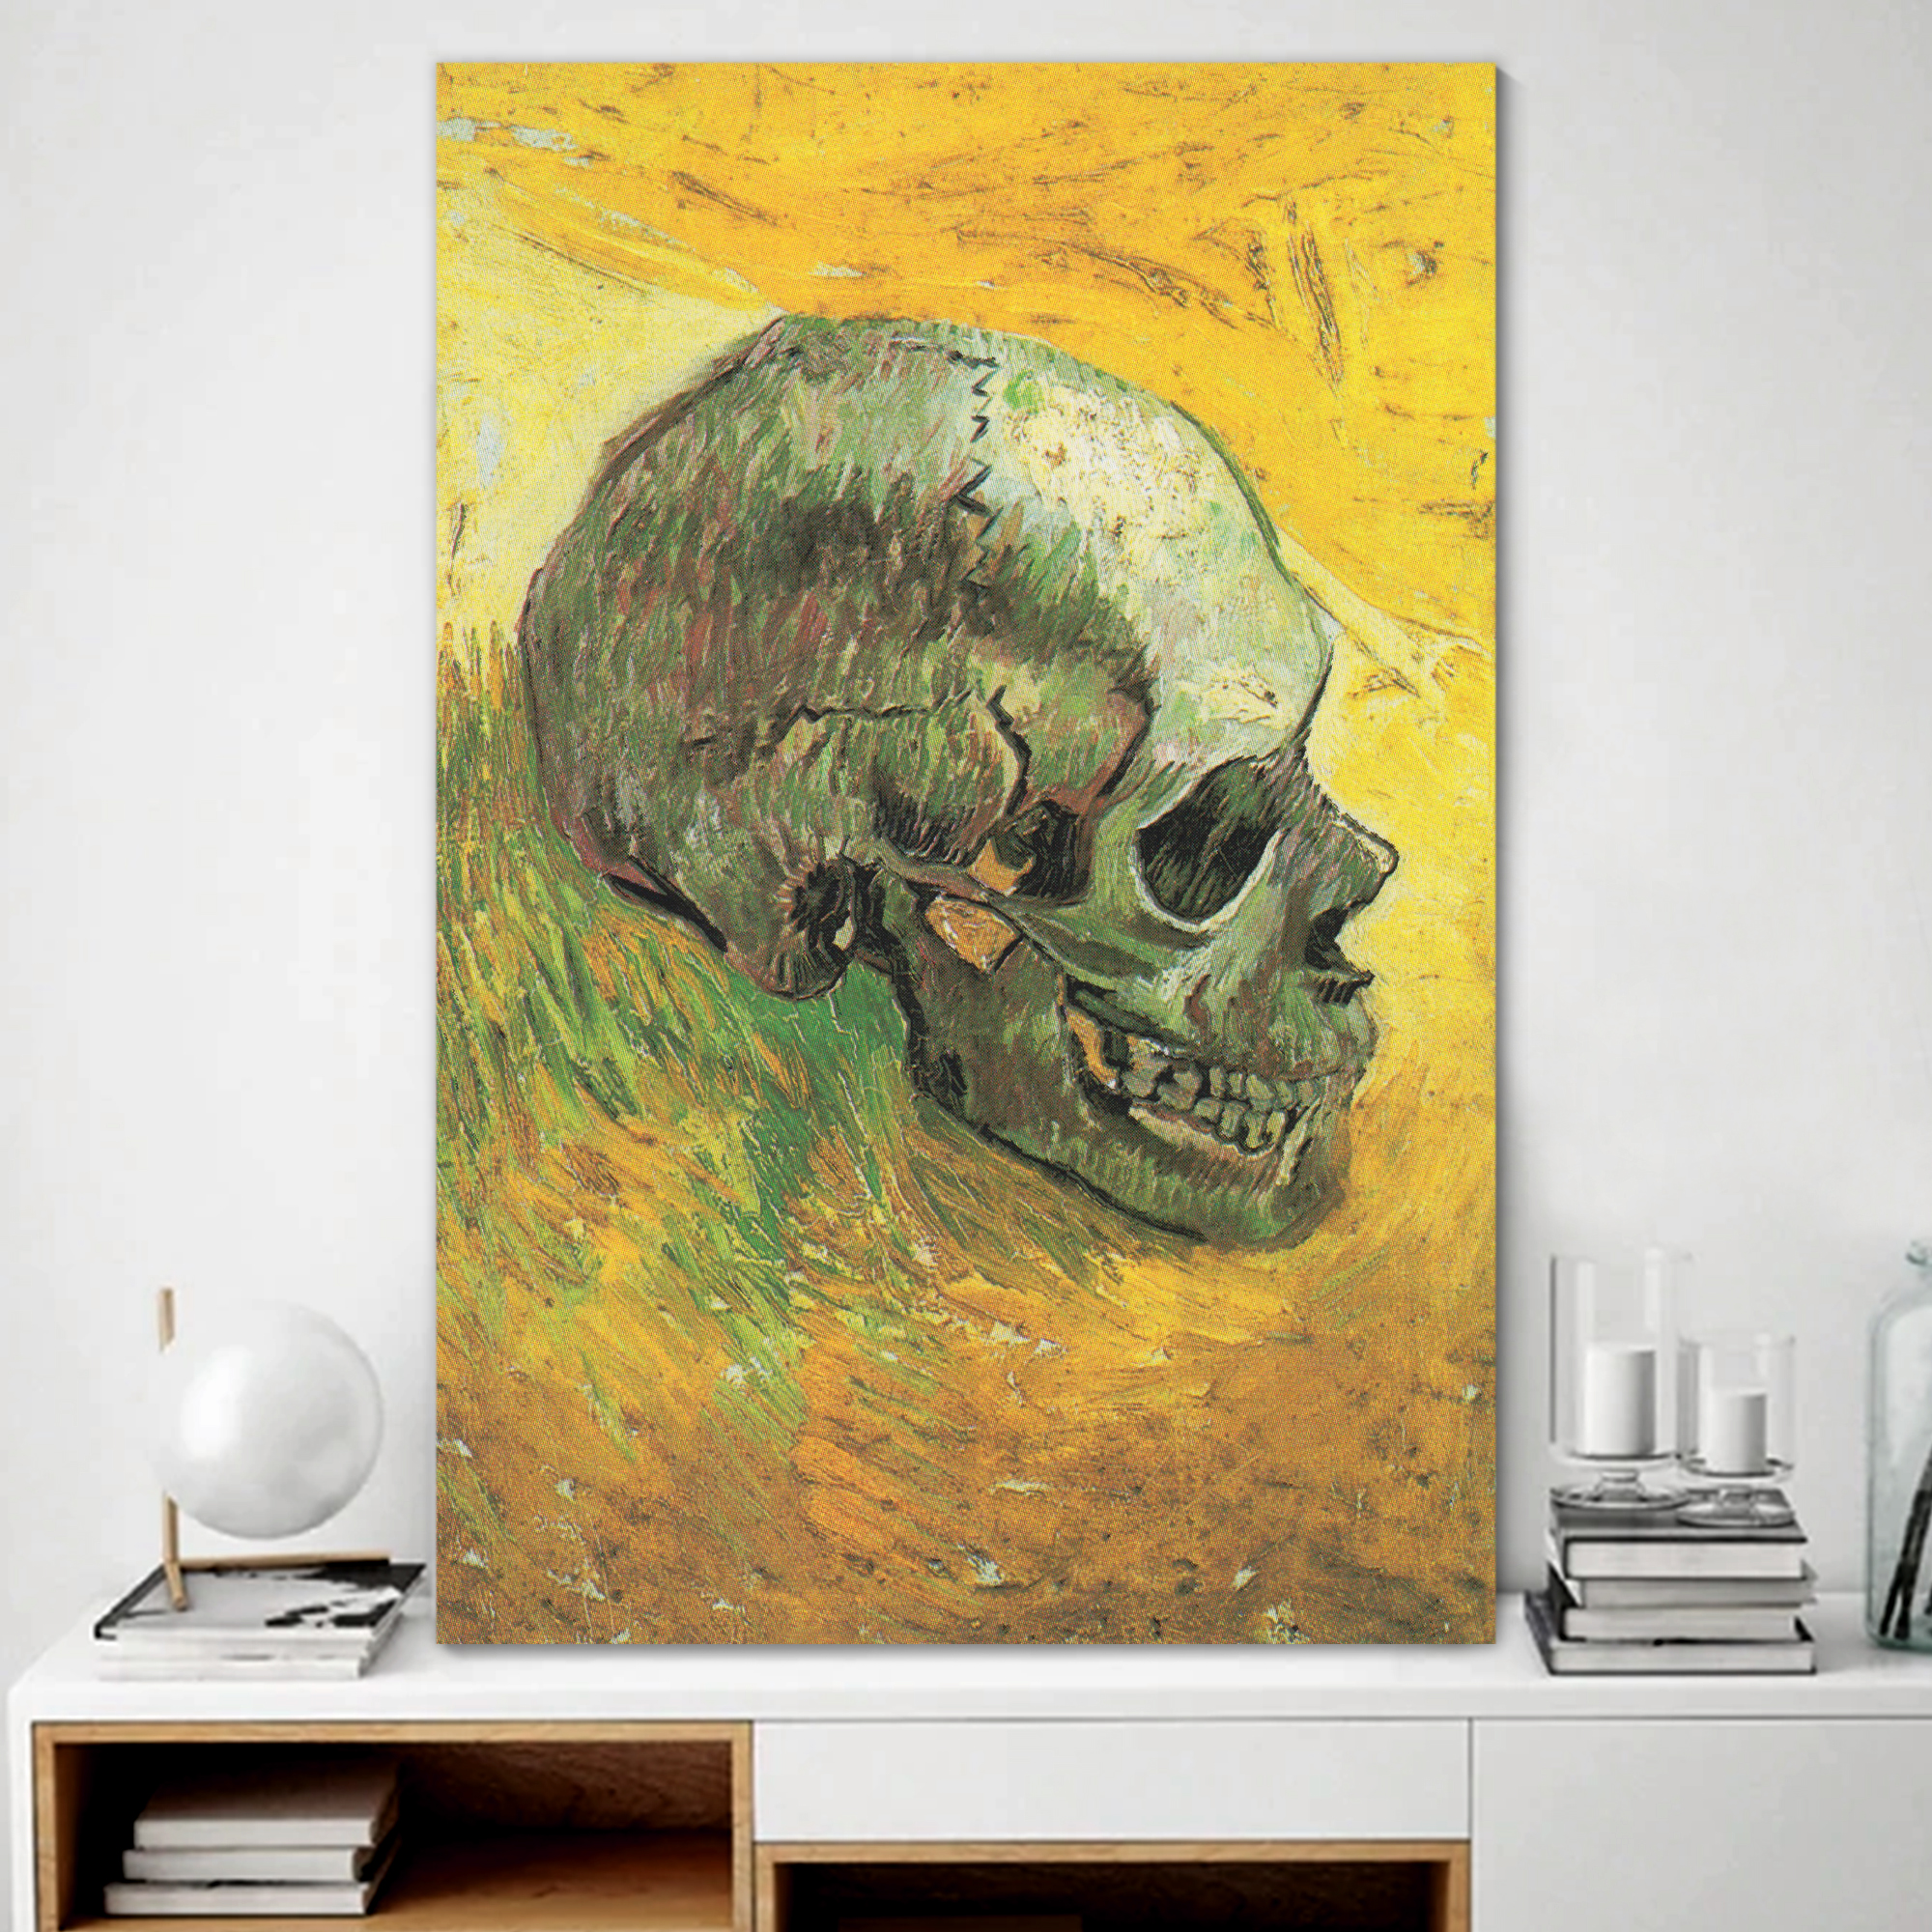 Skull by Vincent Van Gogh - Oil Painting Reproduction on Canvas Prints Wall Art, Ready to Hang - 24